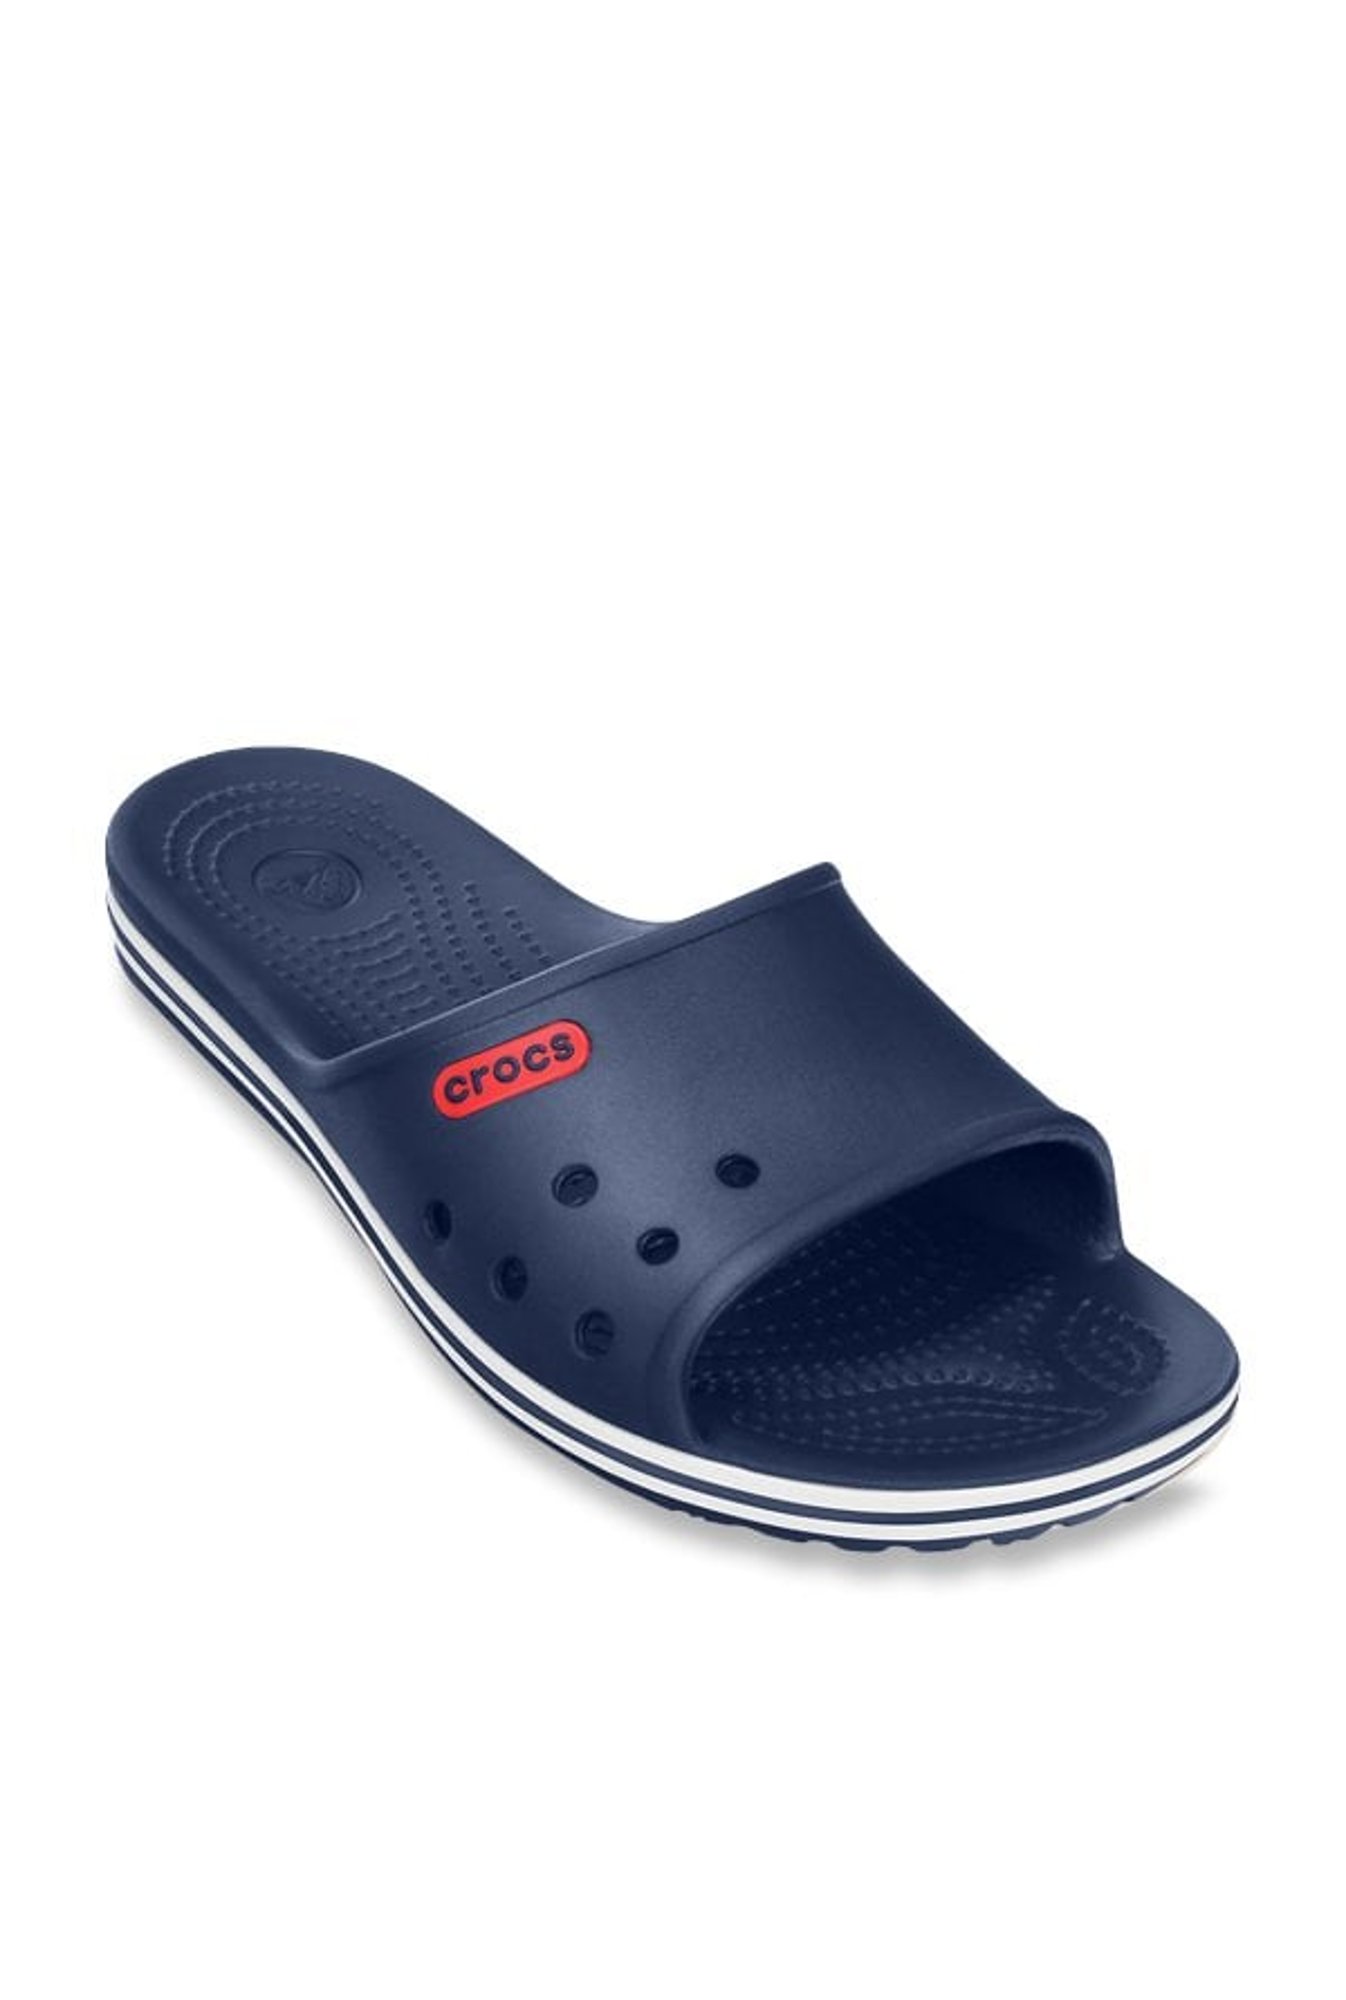 Buy Crocs Unisex Crocband LoPro Navy Slippers from top Brands at Best  Prices Online in India | Tata CLiQ